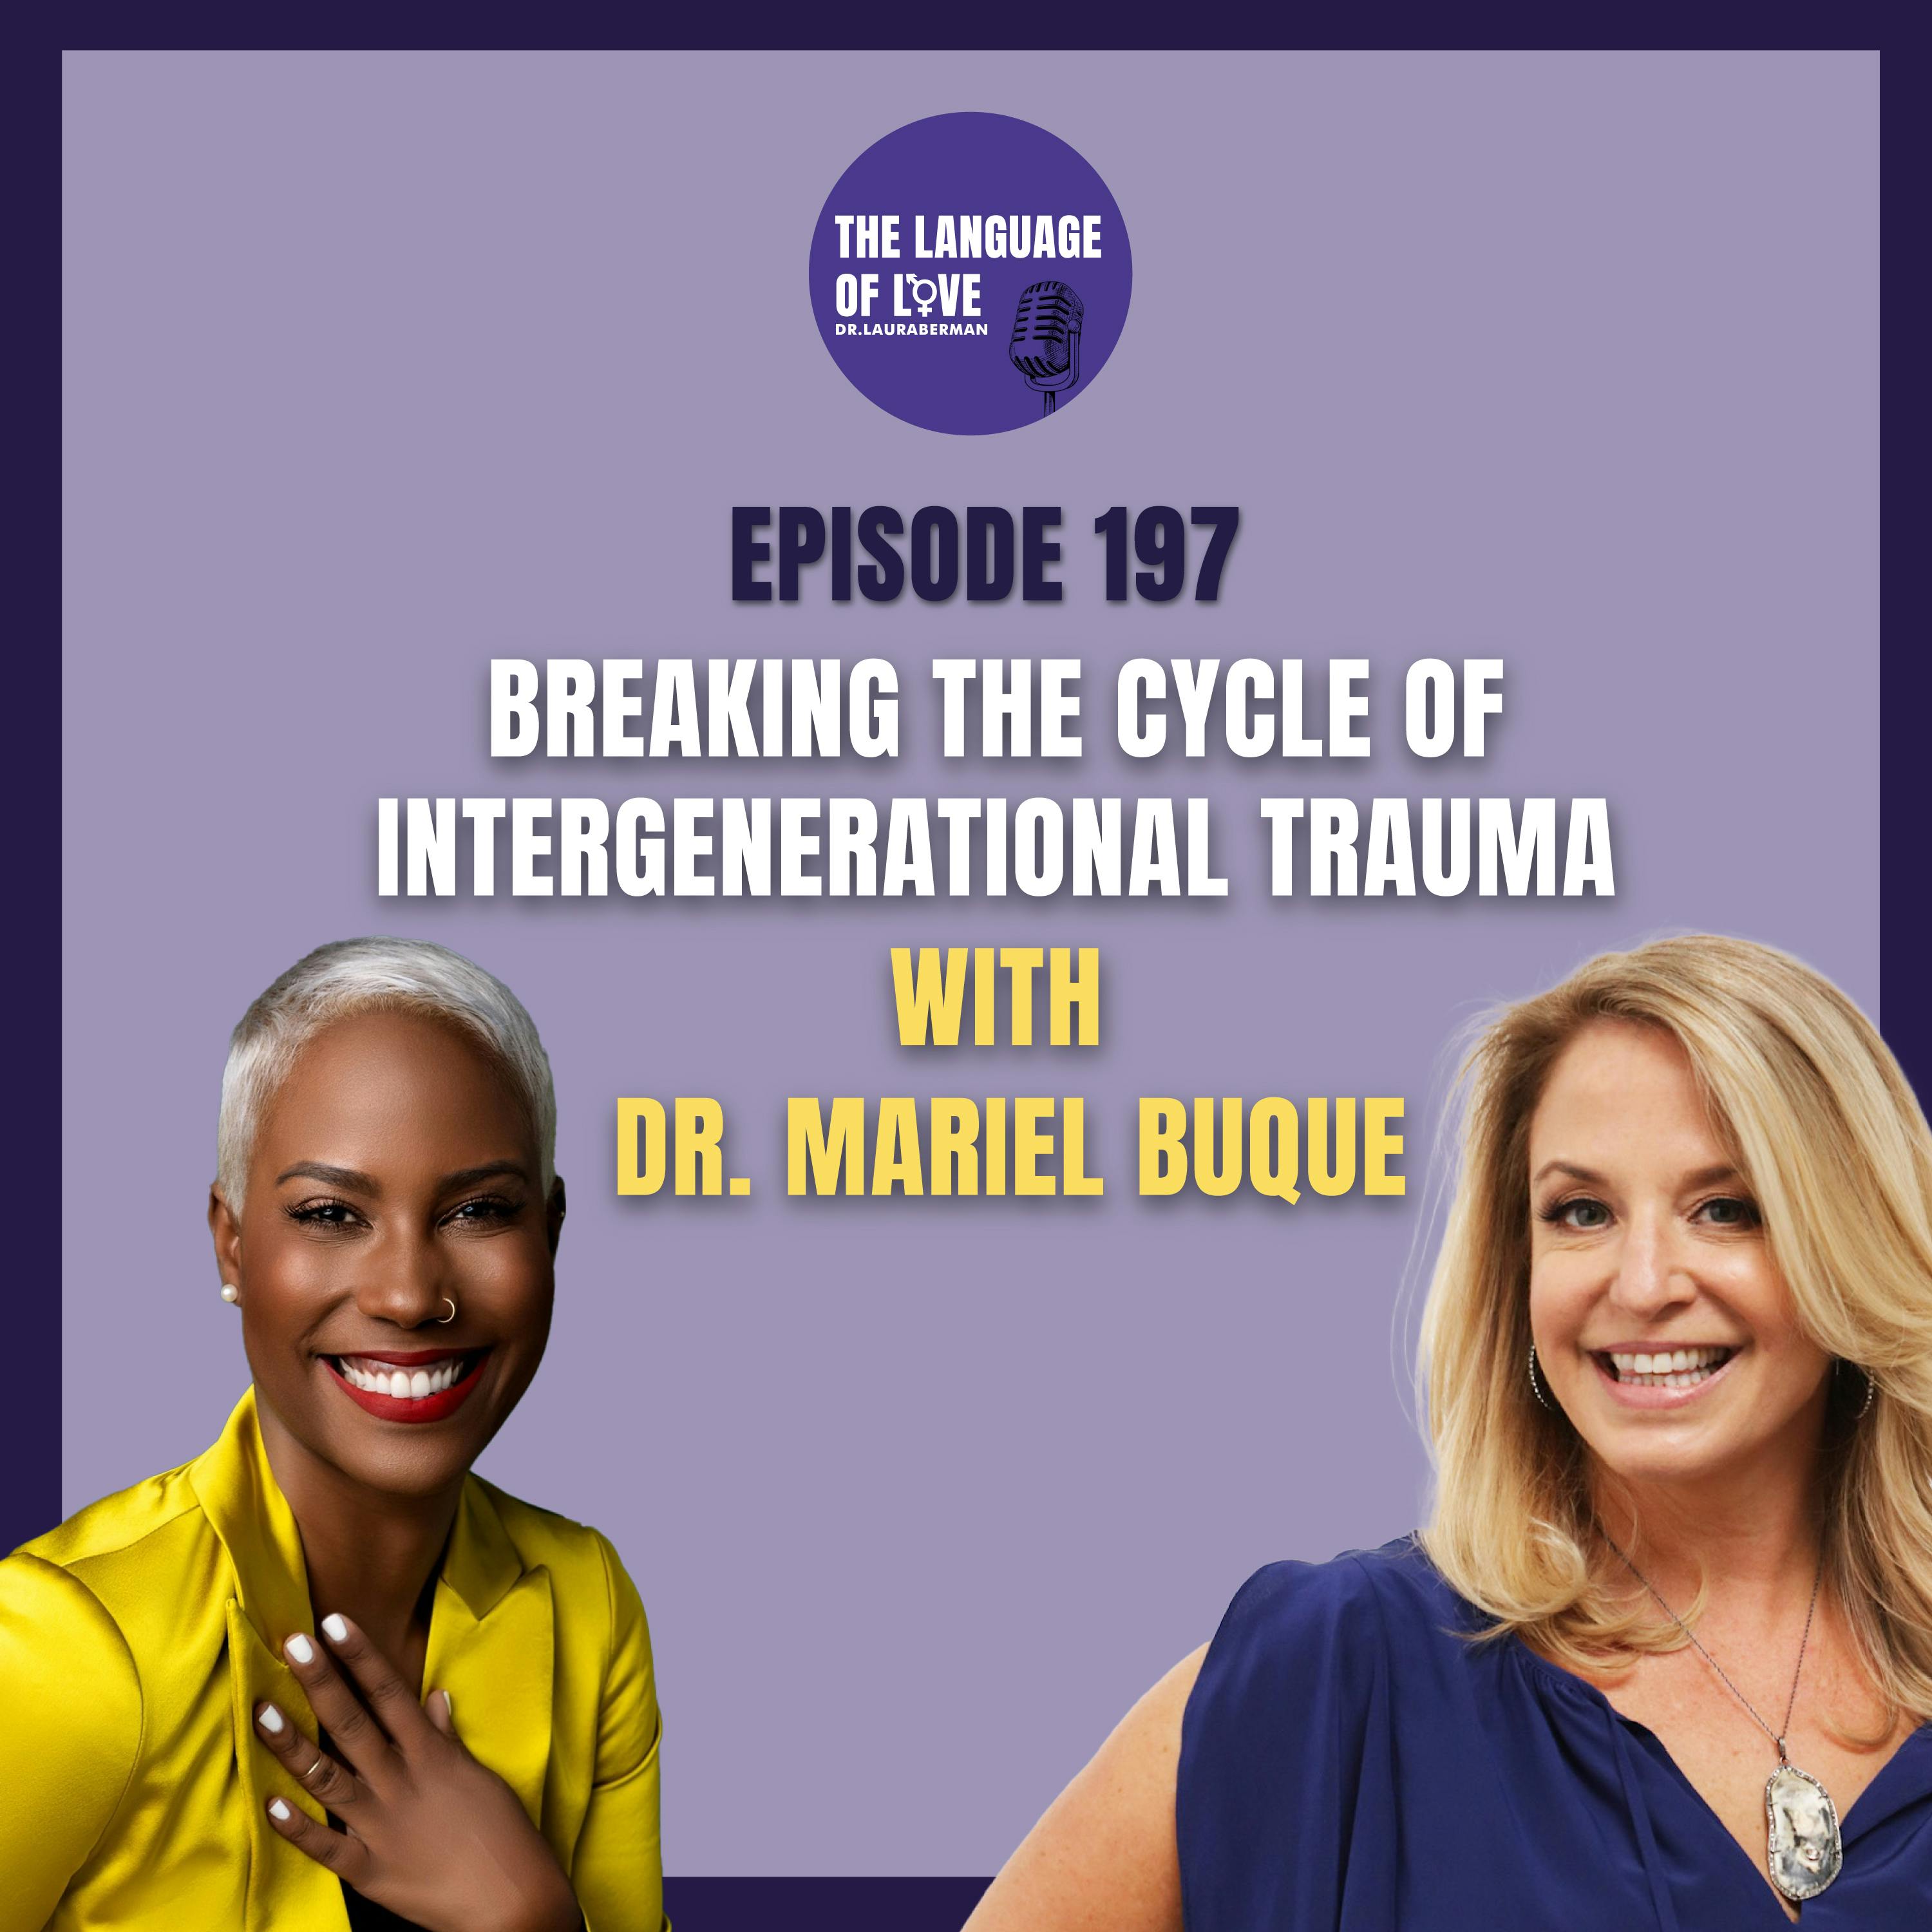 Breaking the Cycle of Intergenerational Trauma with Dr. Mariel Buque